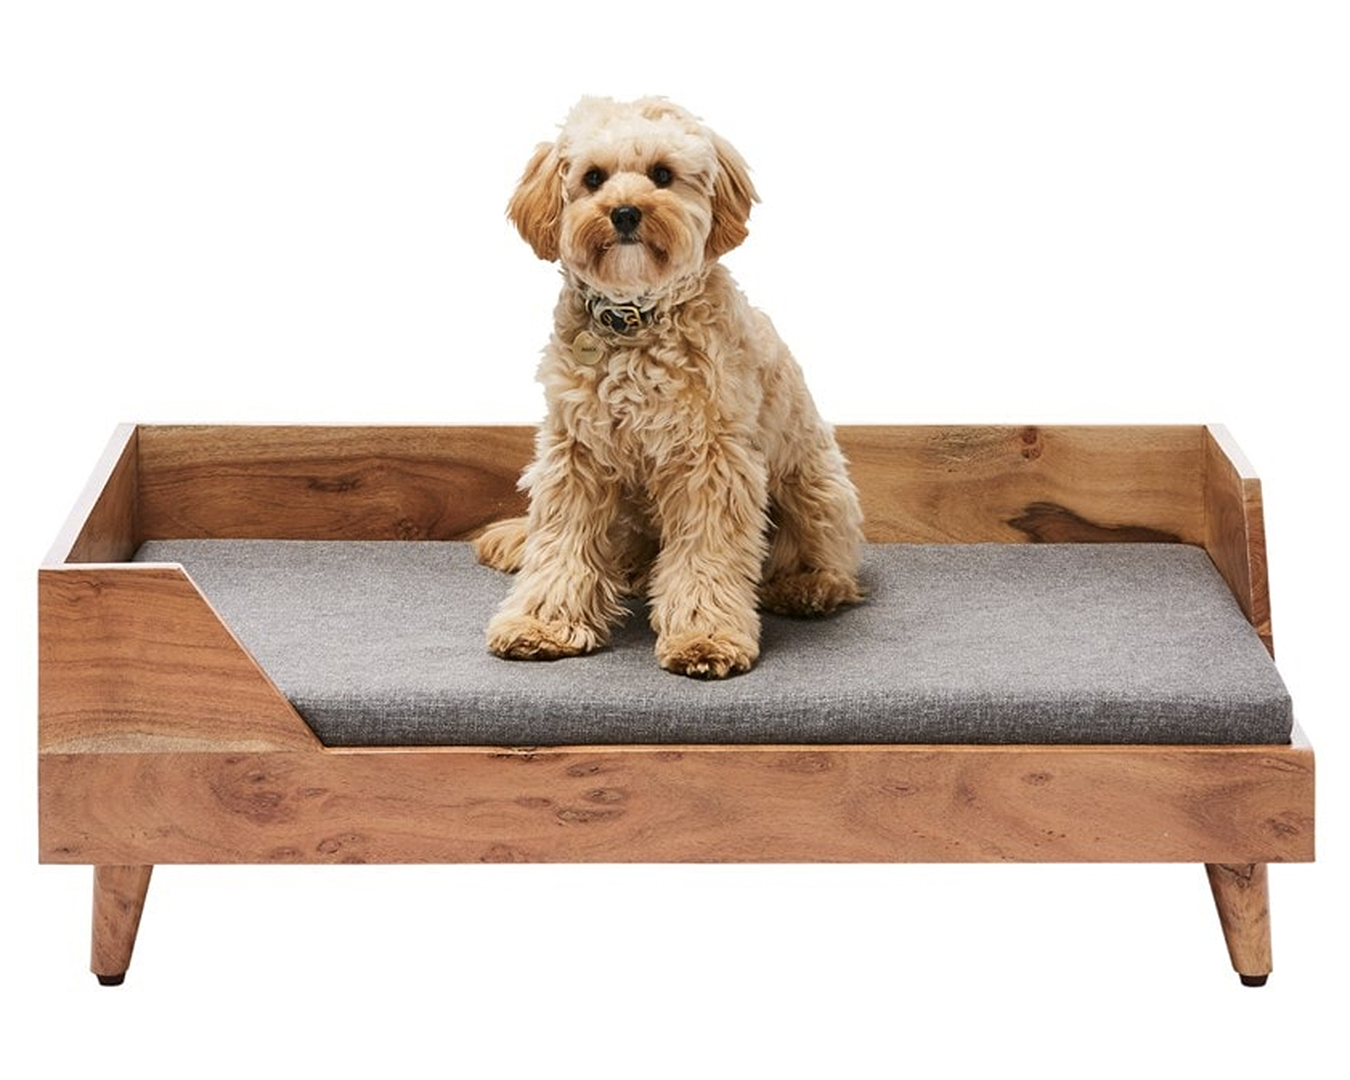 A wee doggie sits proudly on his bougie acacia wood dog bed.